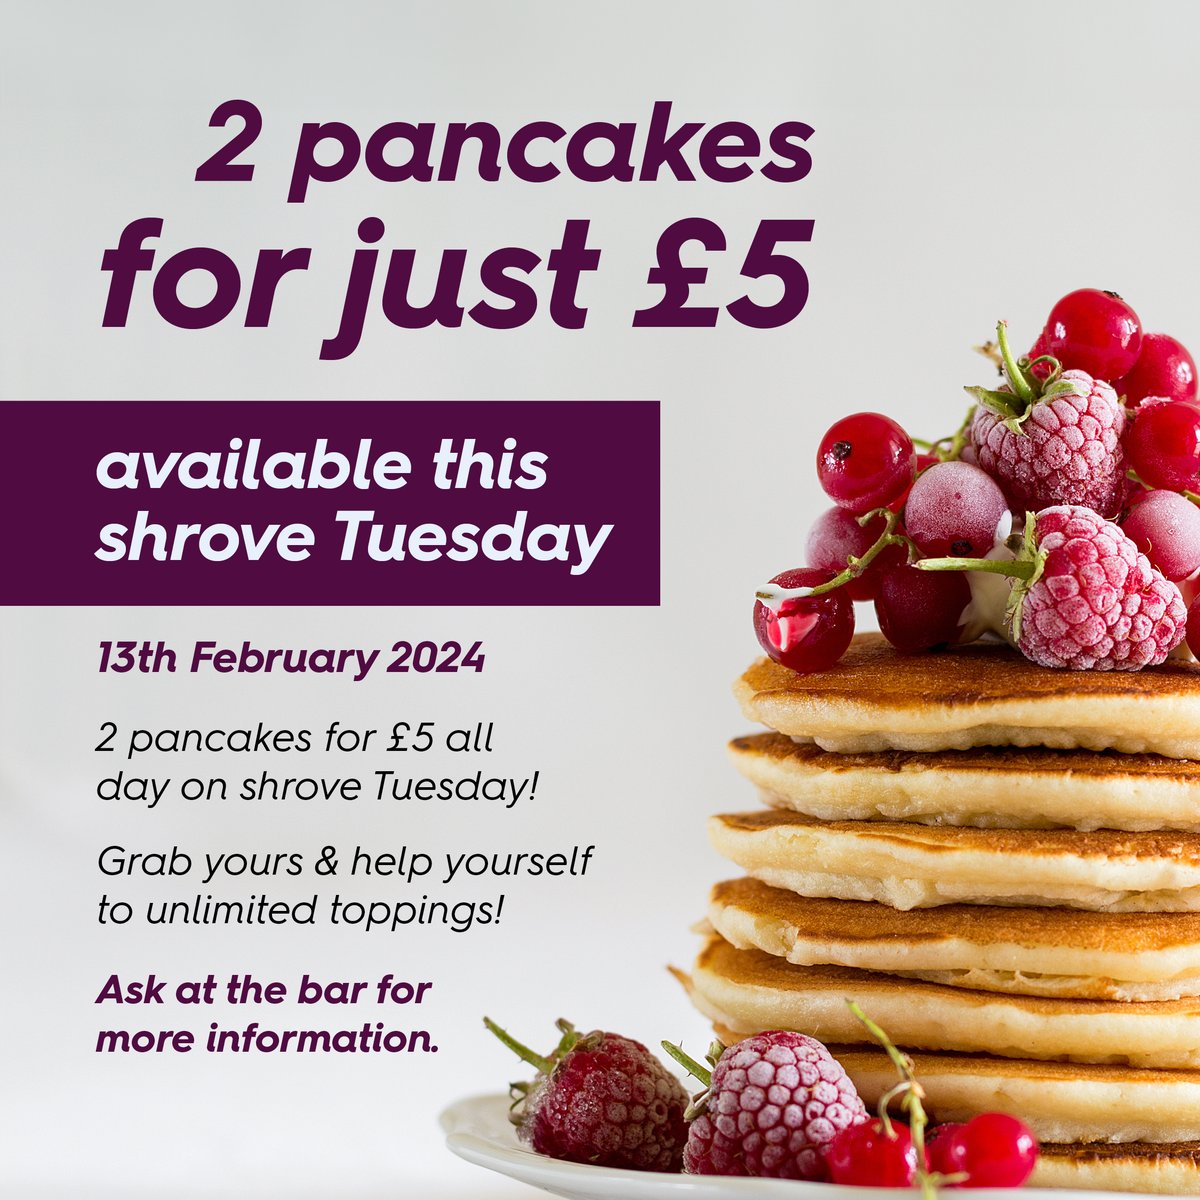 Join us on Shrove Tuesday 13th February where you can enjoy 2 pancakes for just £5. See more below ⤵️